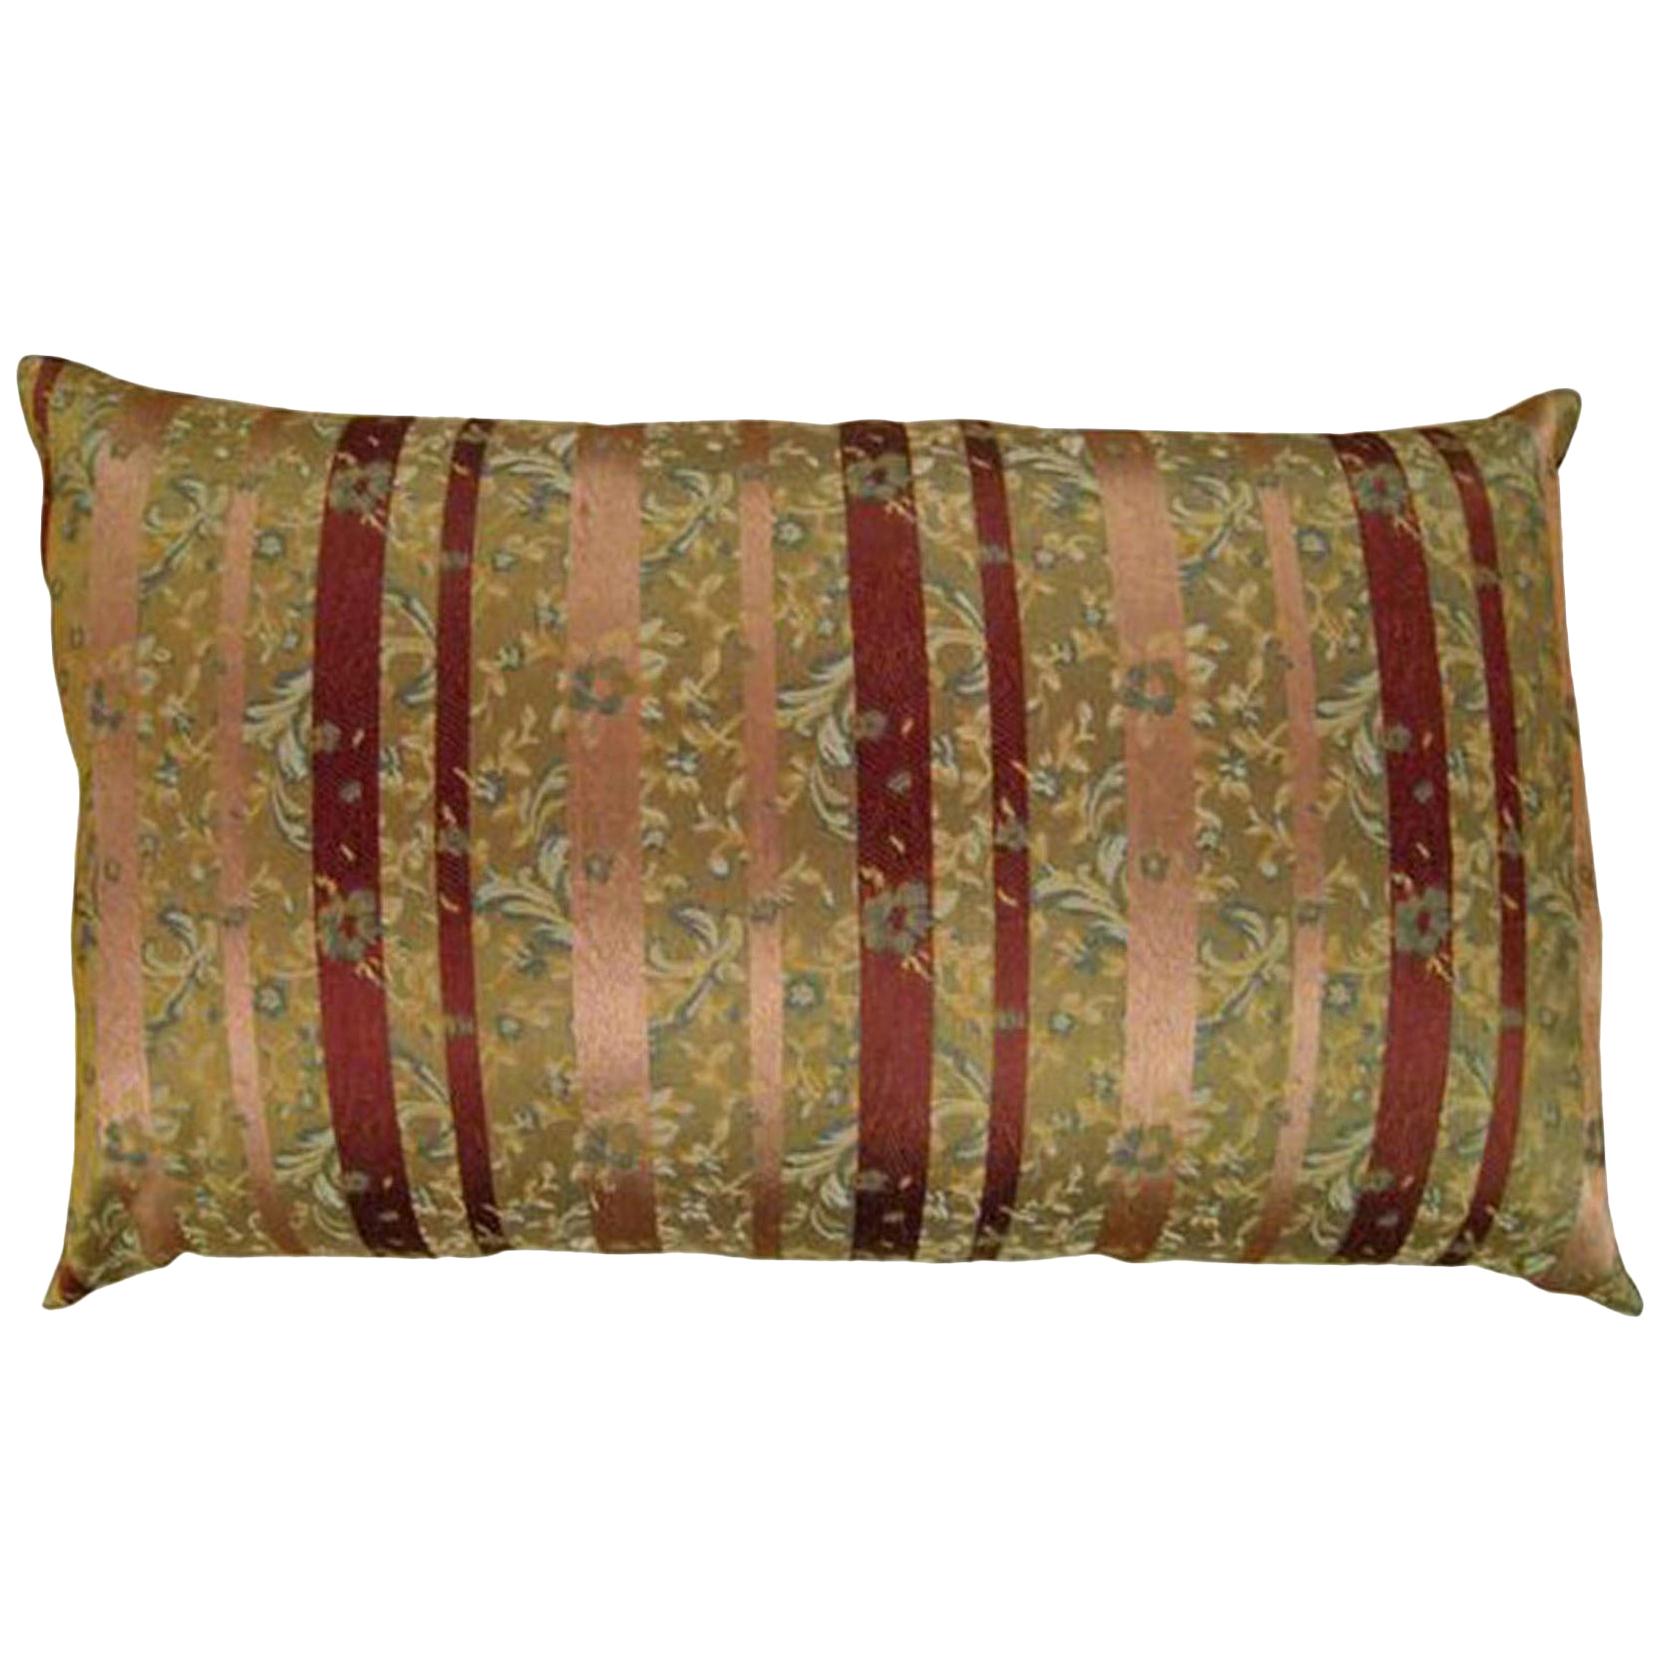 Vintage Decorative Chinoiserie Brocade Pillow with Stripes For Sale